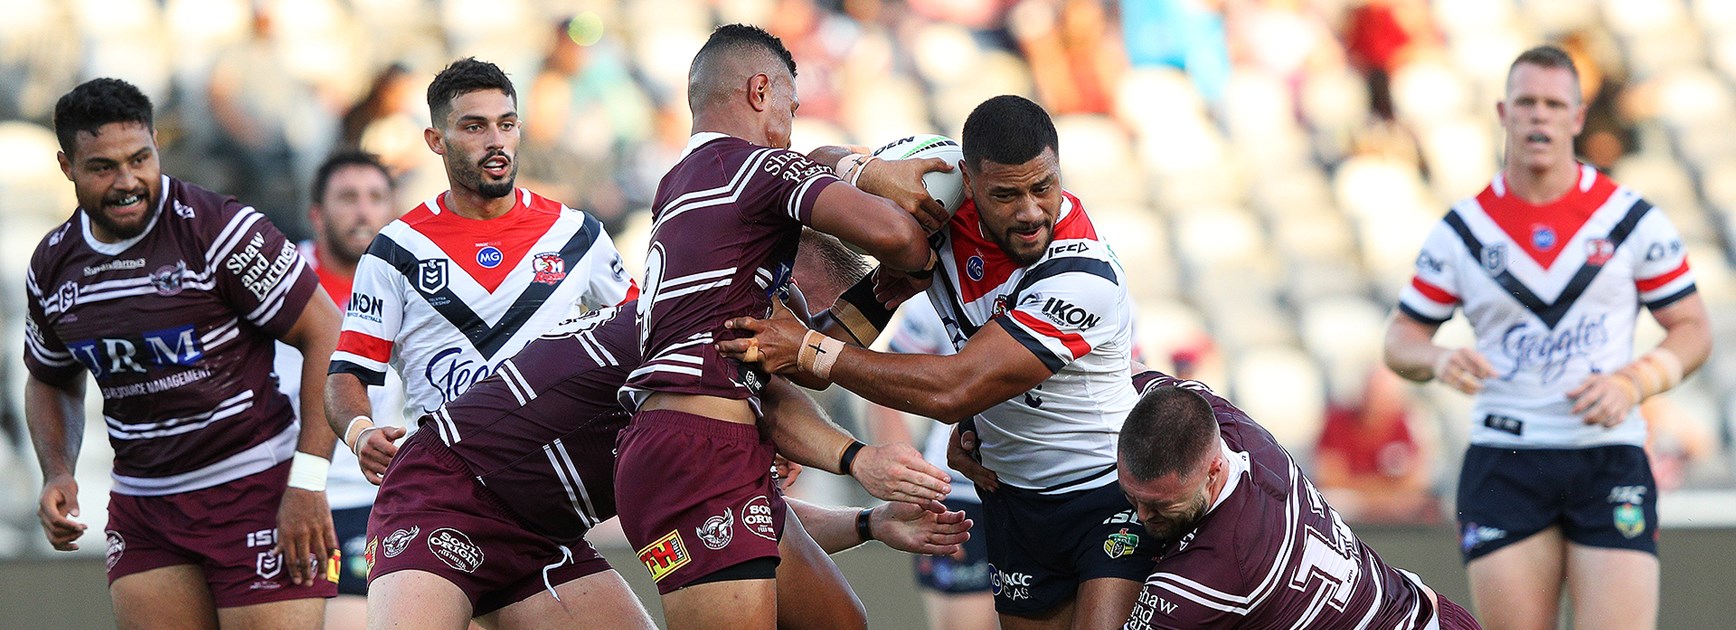 Poasa started for the Roosters in their Community Cup trial against the Sea Eagles.